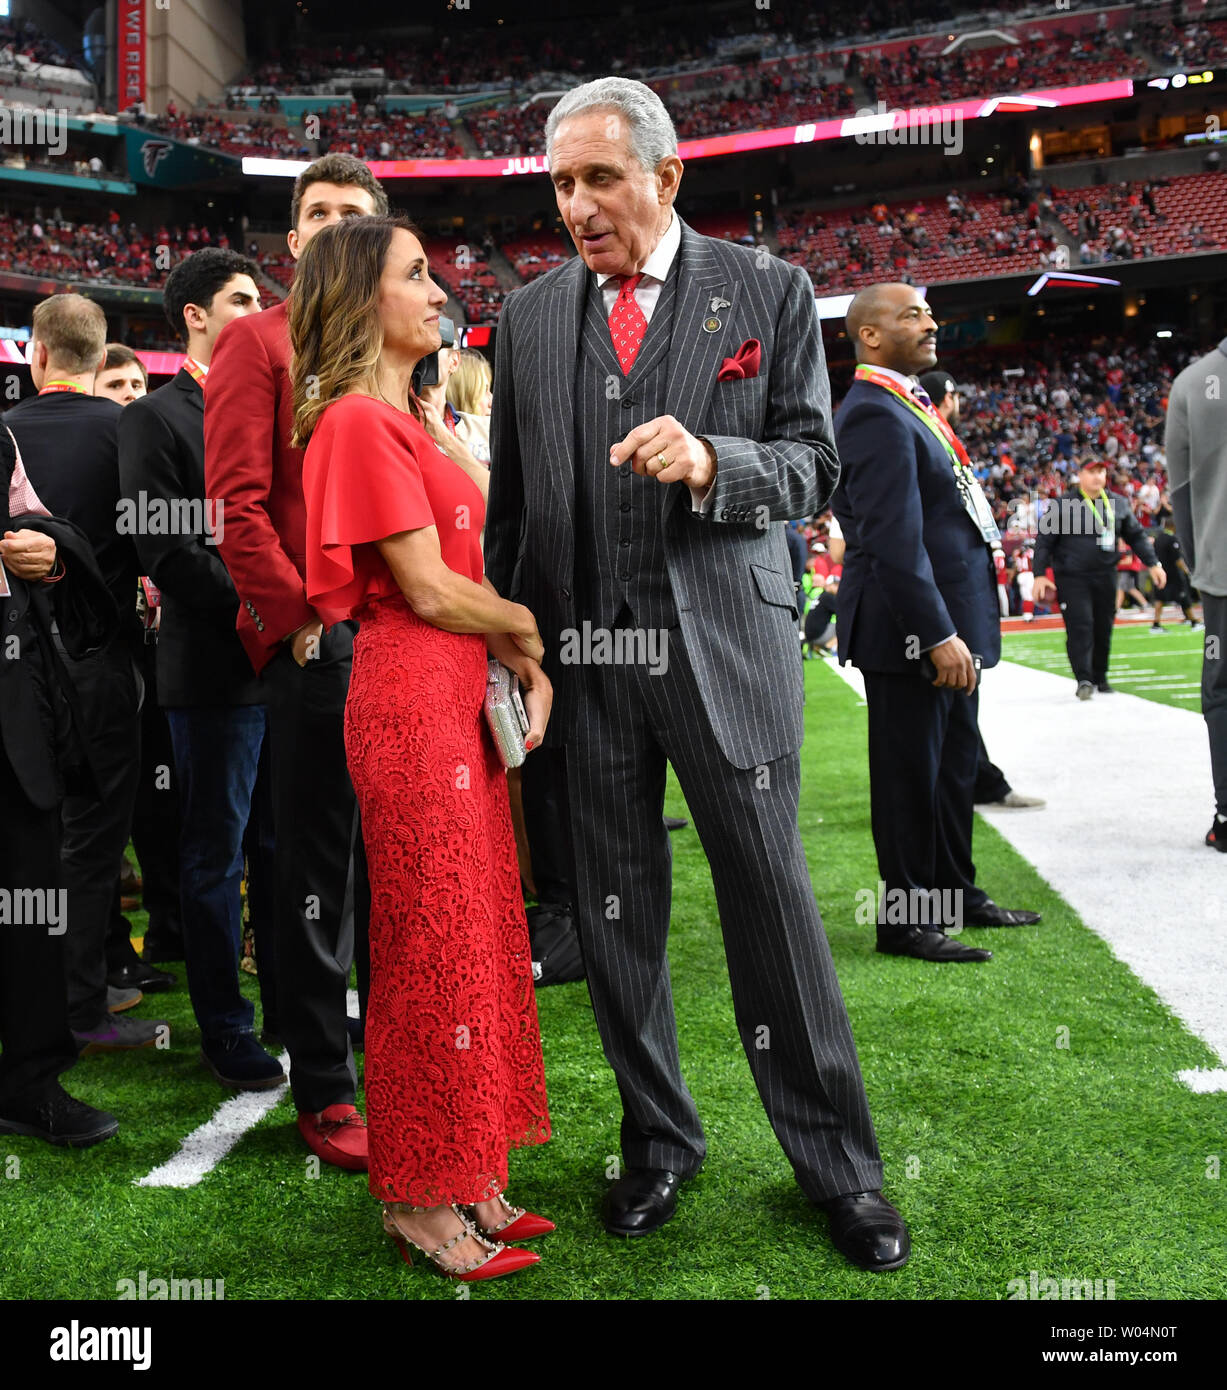 Atlanta Falcons owner Arthur Blank stands on the sidelines before Super Bowl  LI against the New